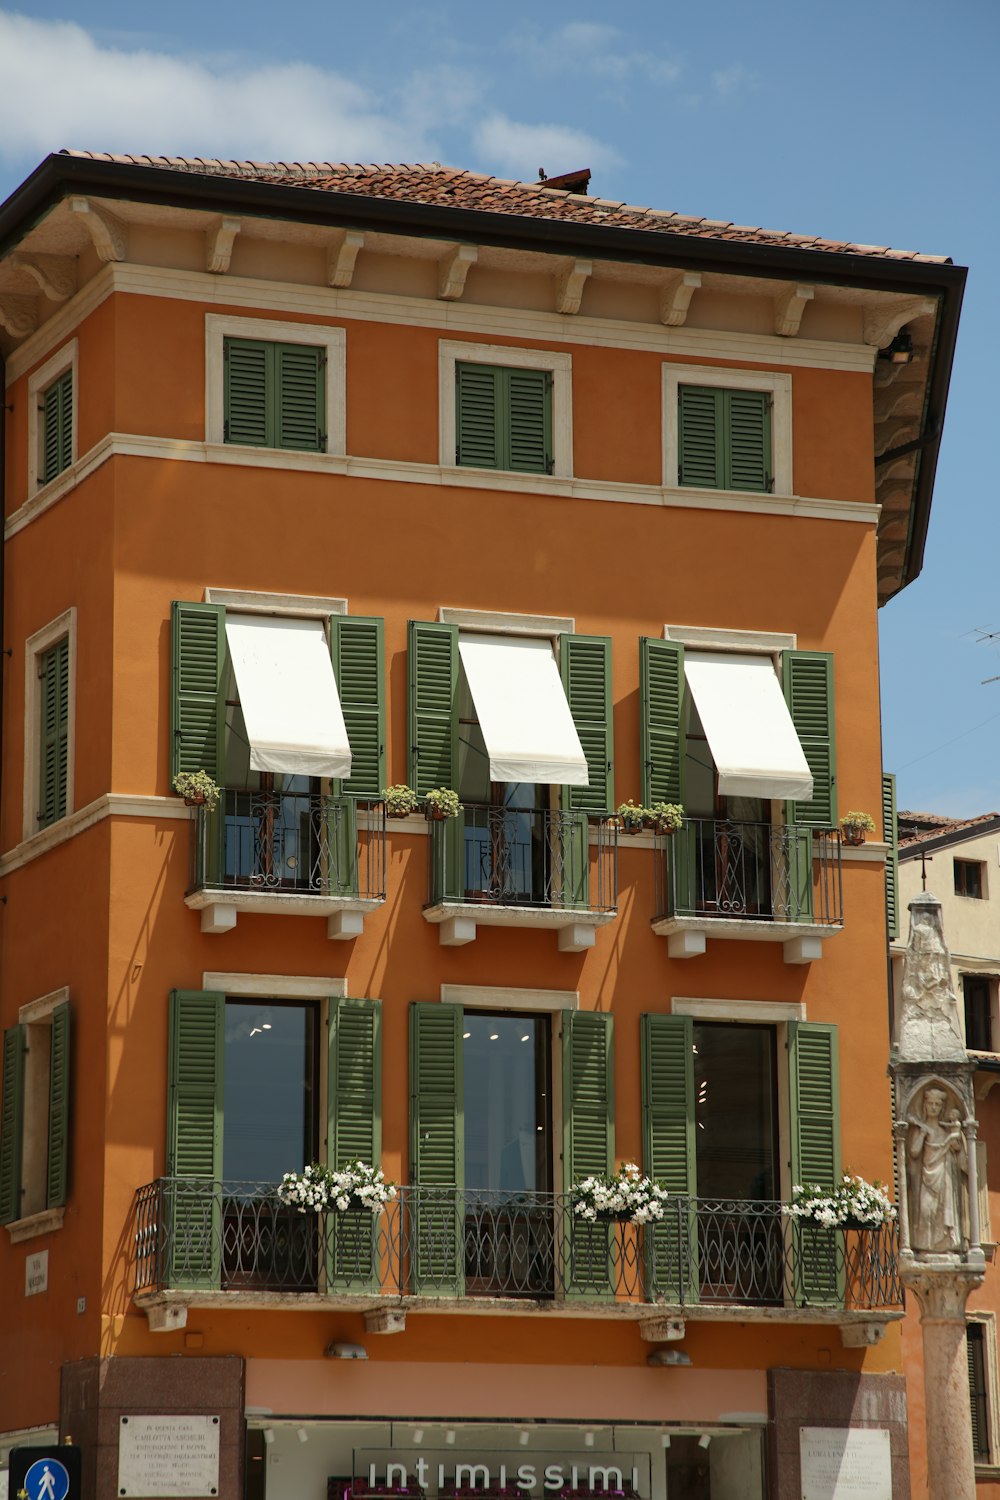 a tall orange building with green shutters and balconies